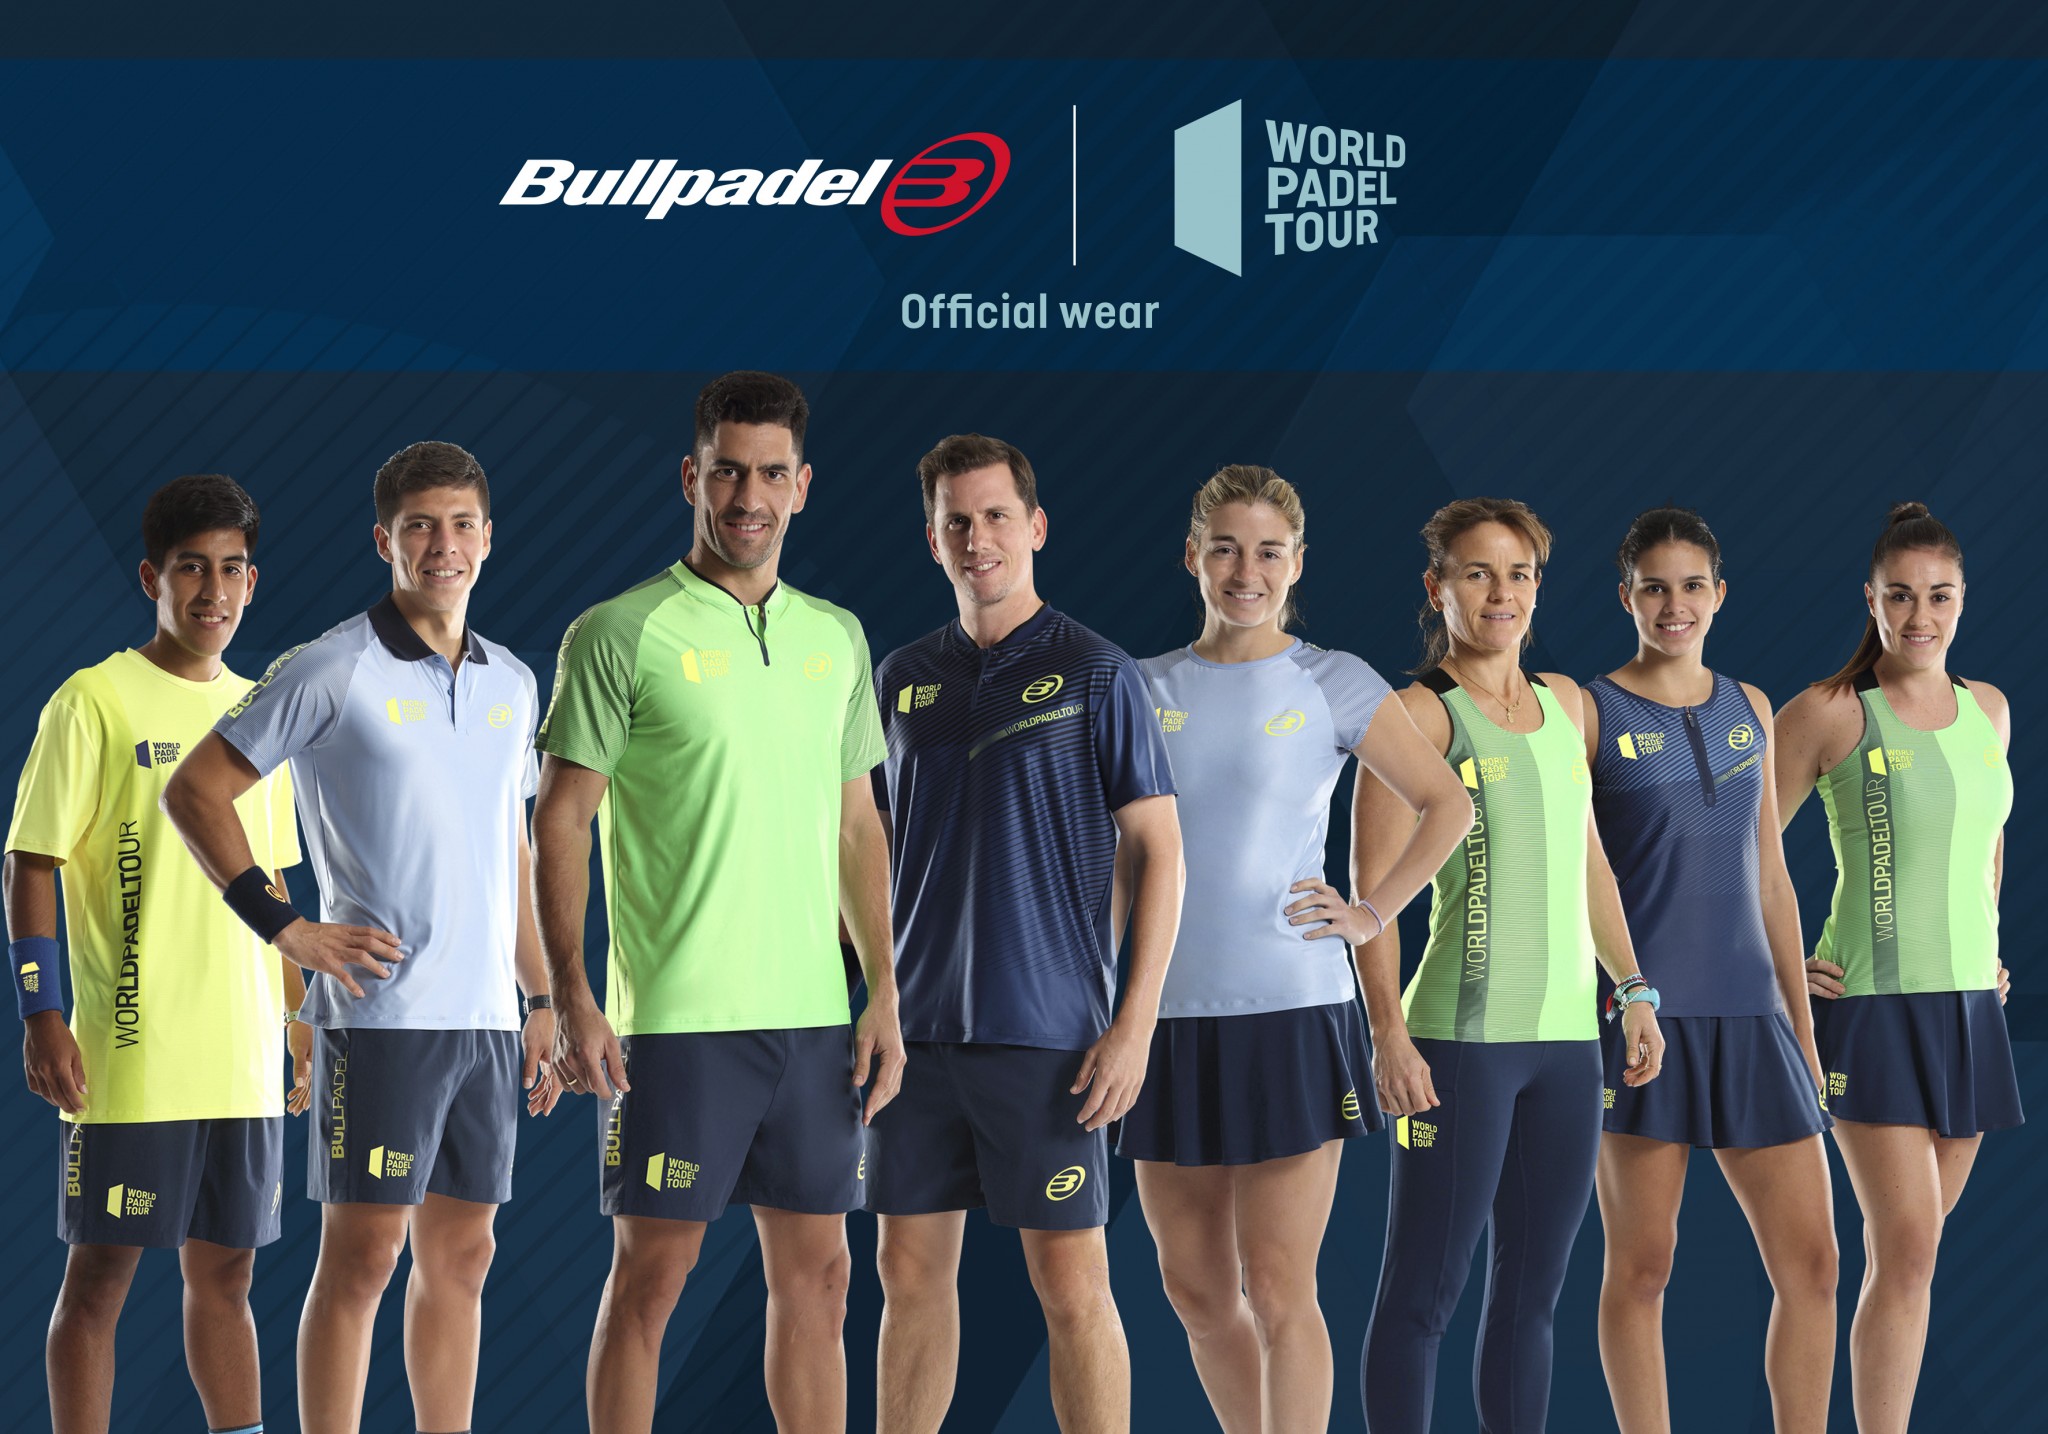 Bullpadel launches its online store